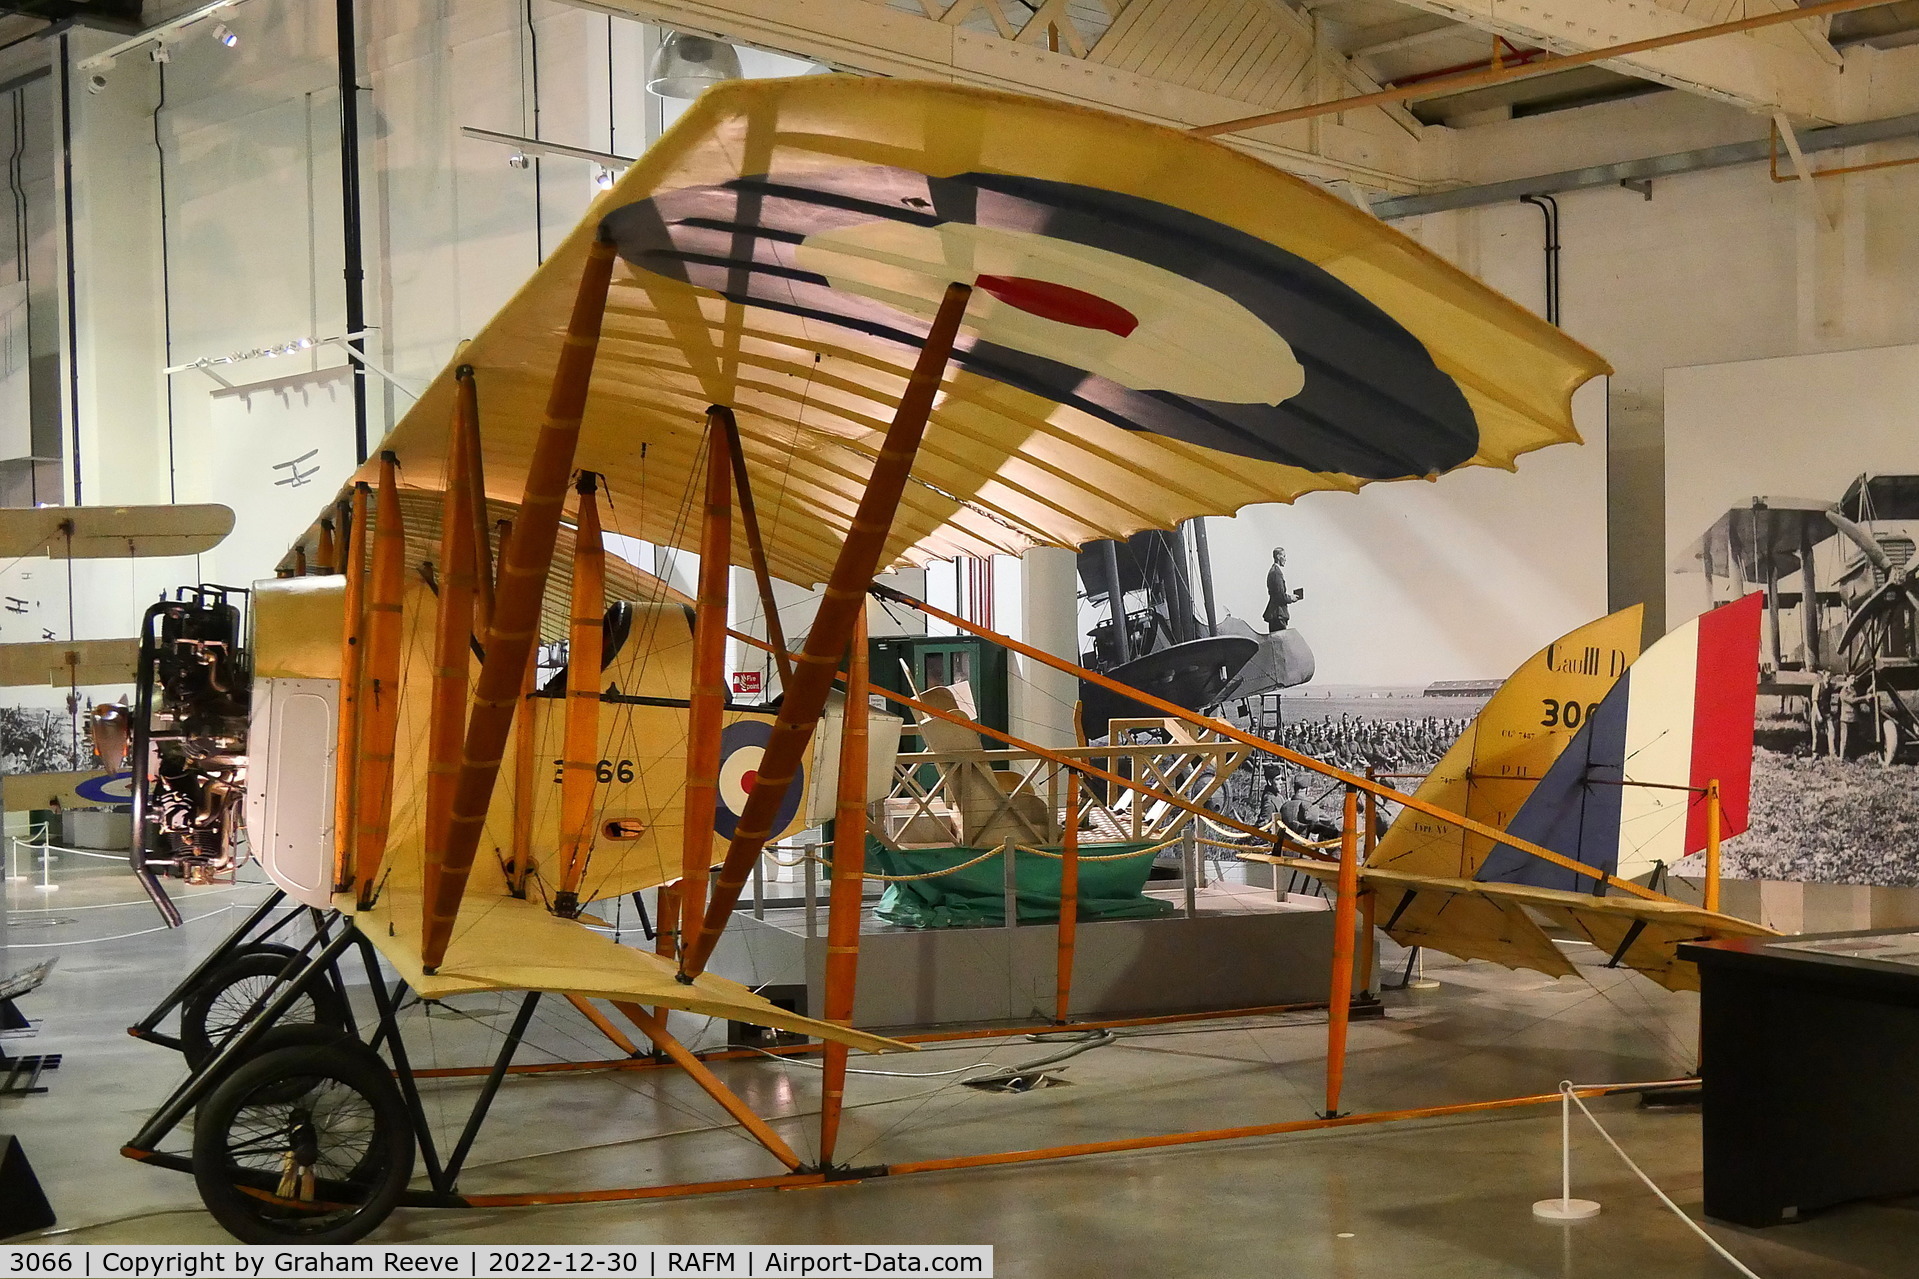 3066, 1914 Caudron G.3 C/N 7487, On display at the RAF Museum, Hendon.